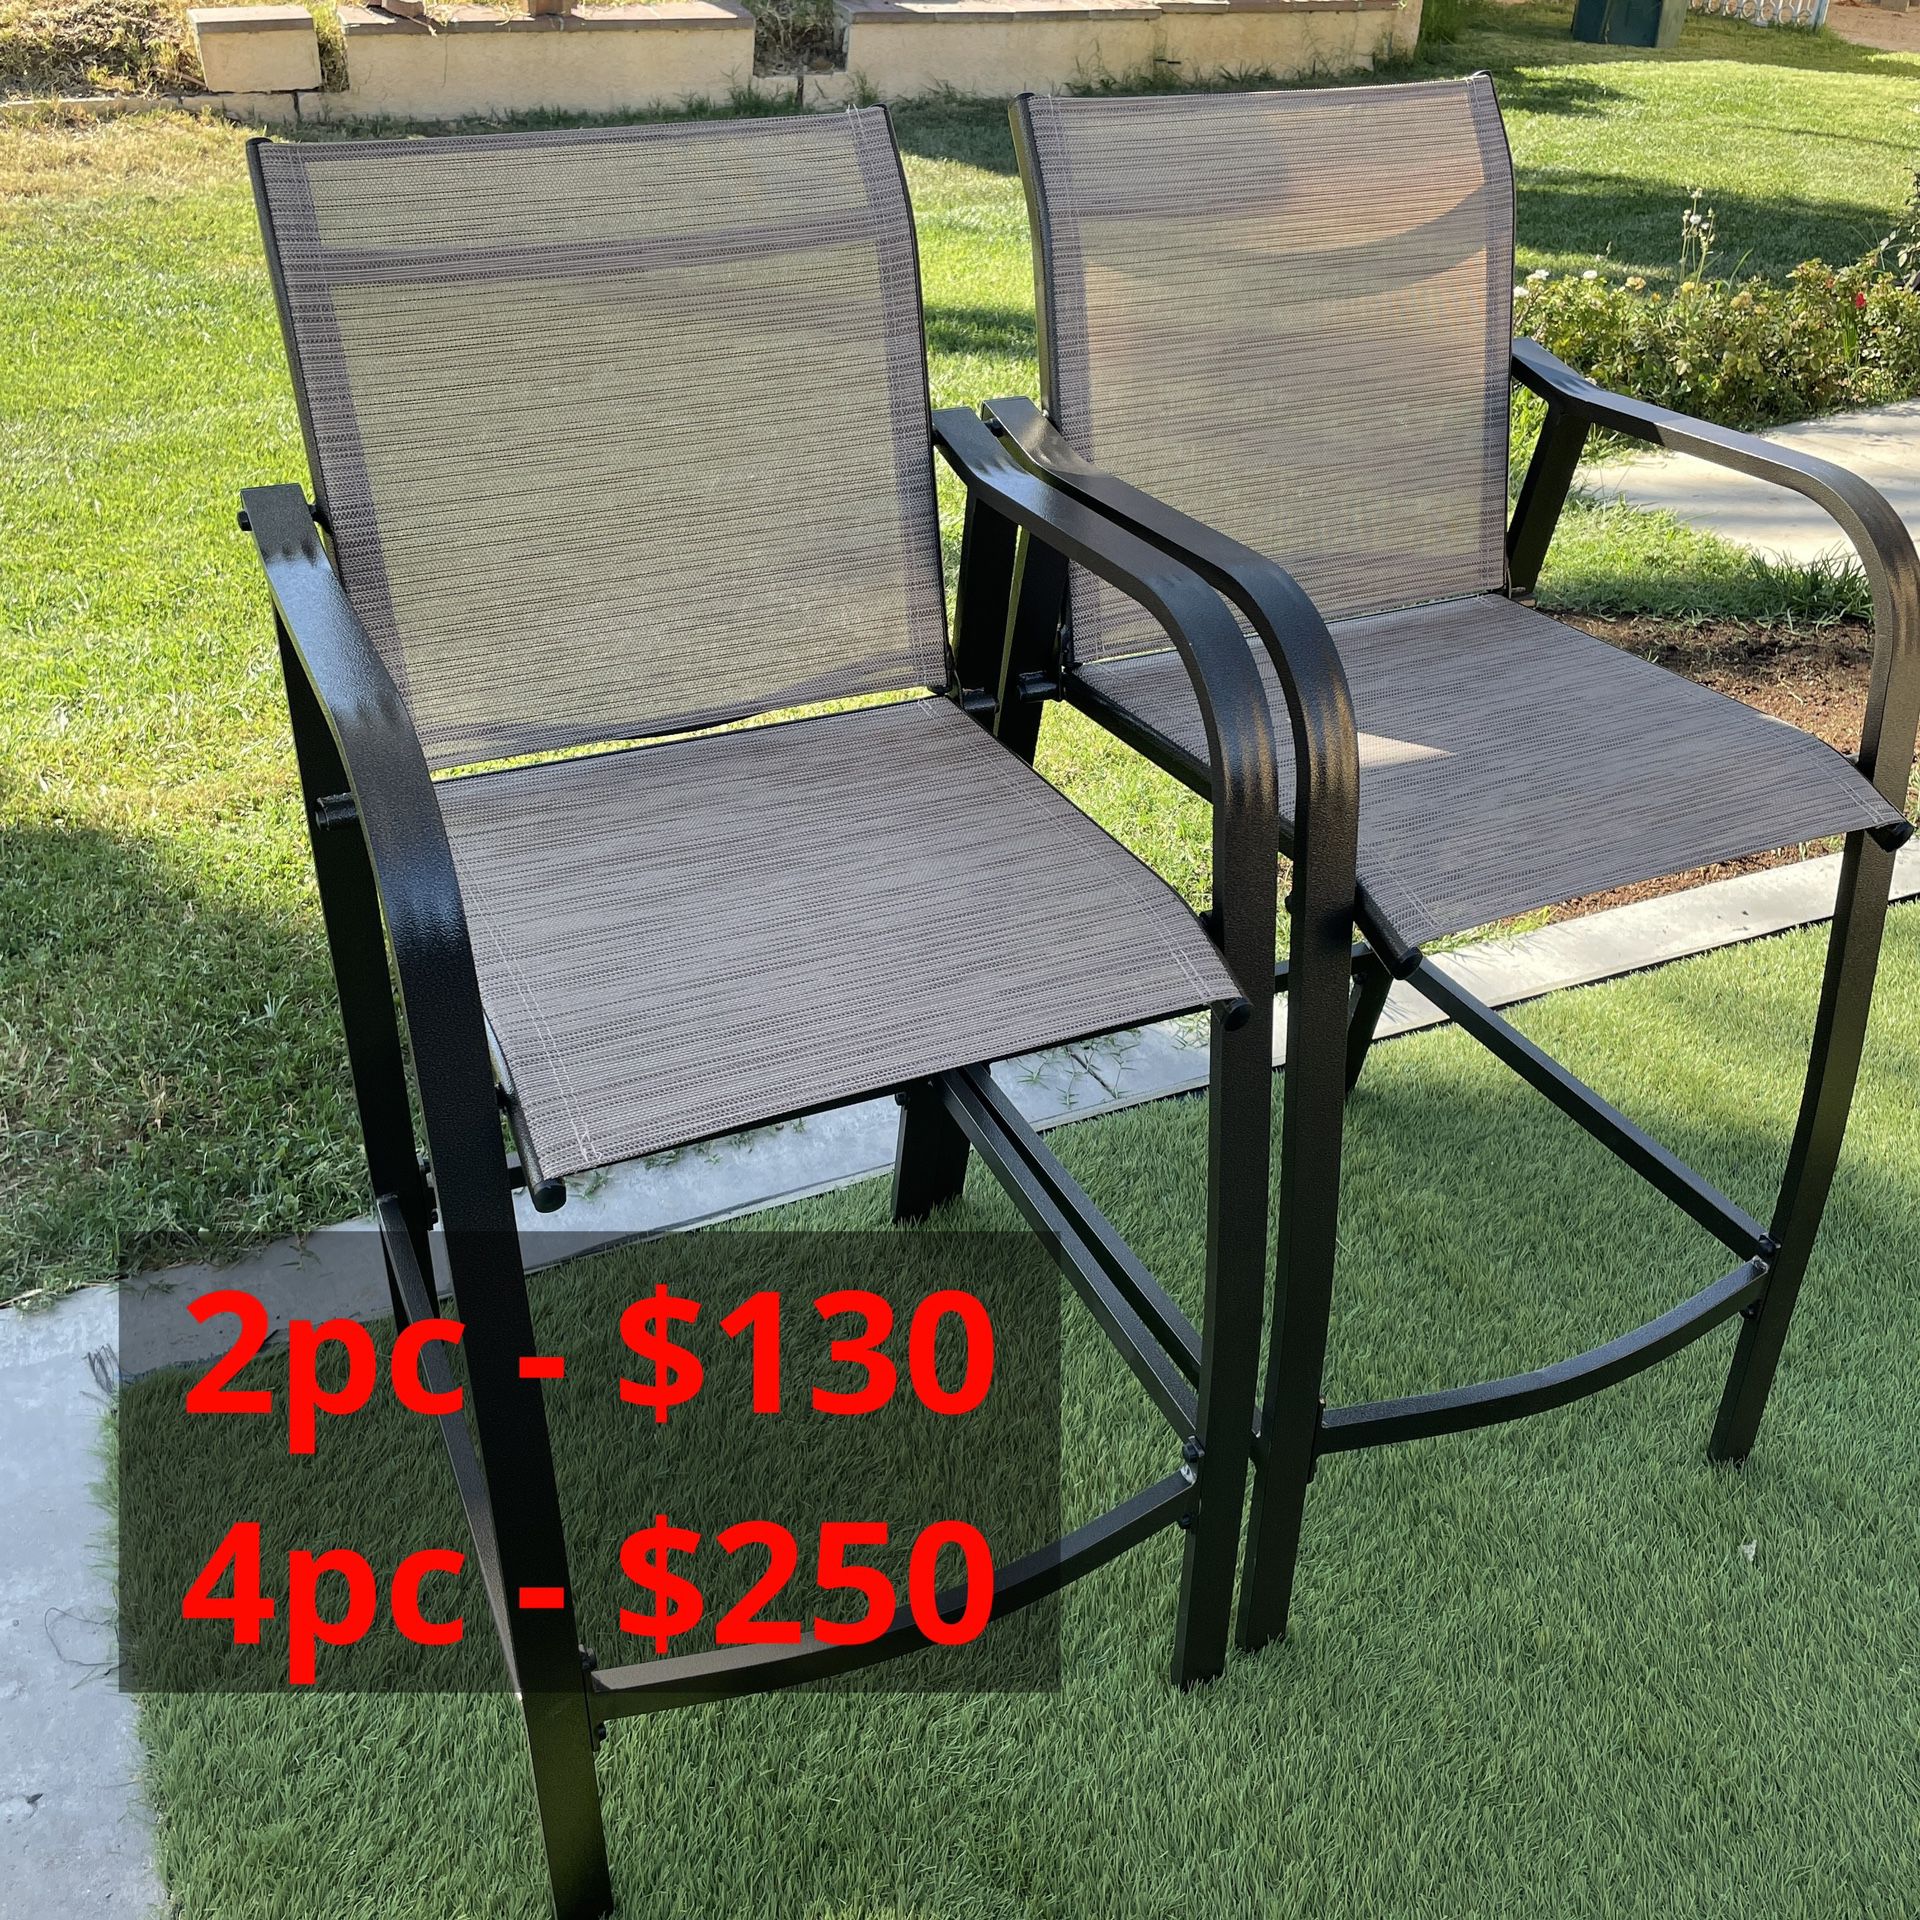 New All Weather Outdoor Patio Counter Height Bar Stool Chair High Chair Beige (2pc - $130) Or (4pc - $250)